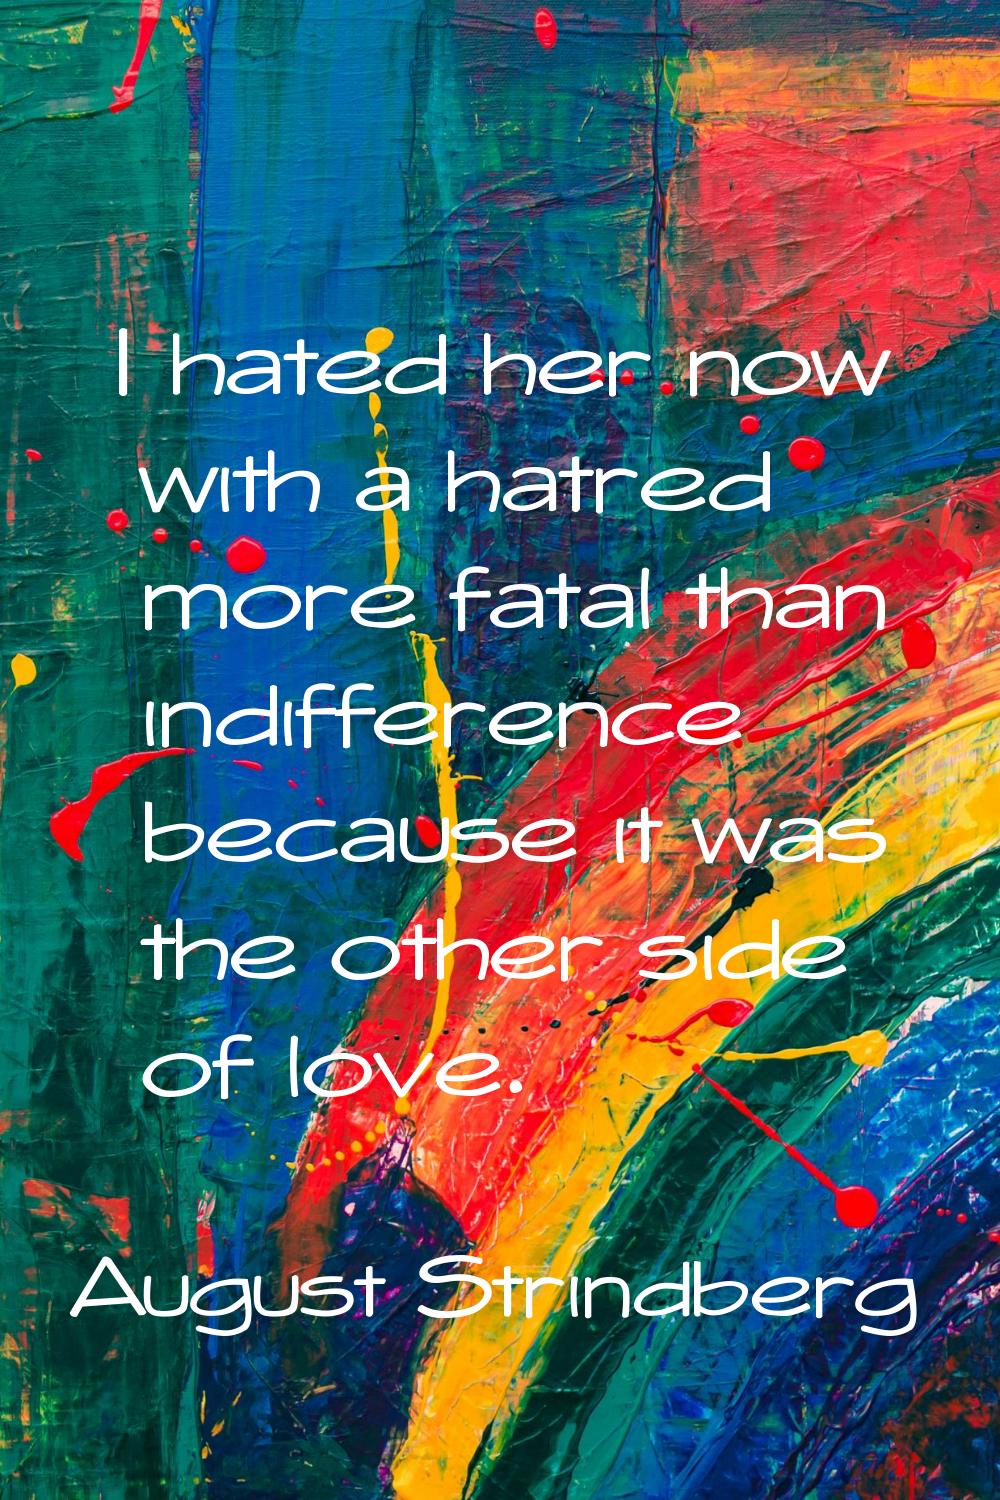 I hated her now with a hatred more fatal than indifference because it was the other side of love.